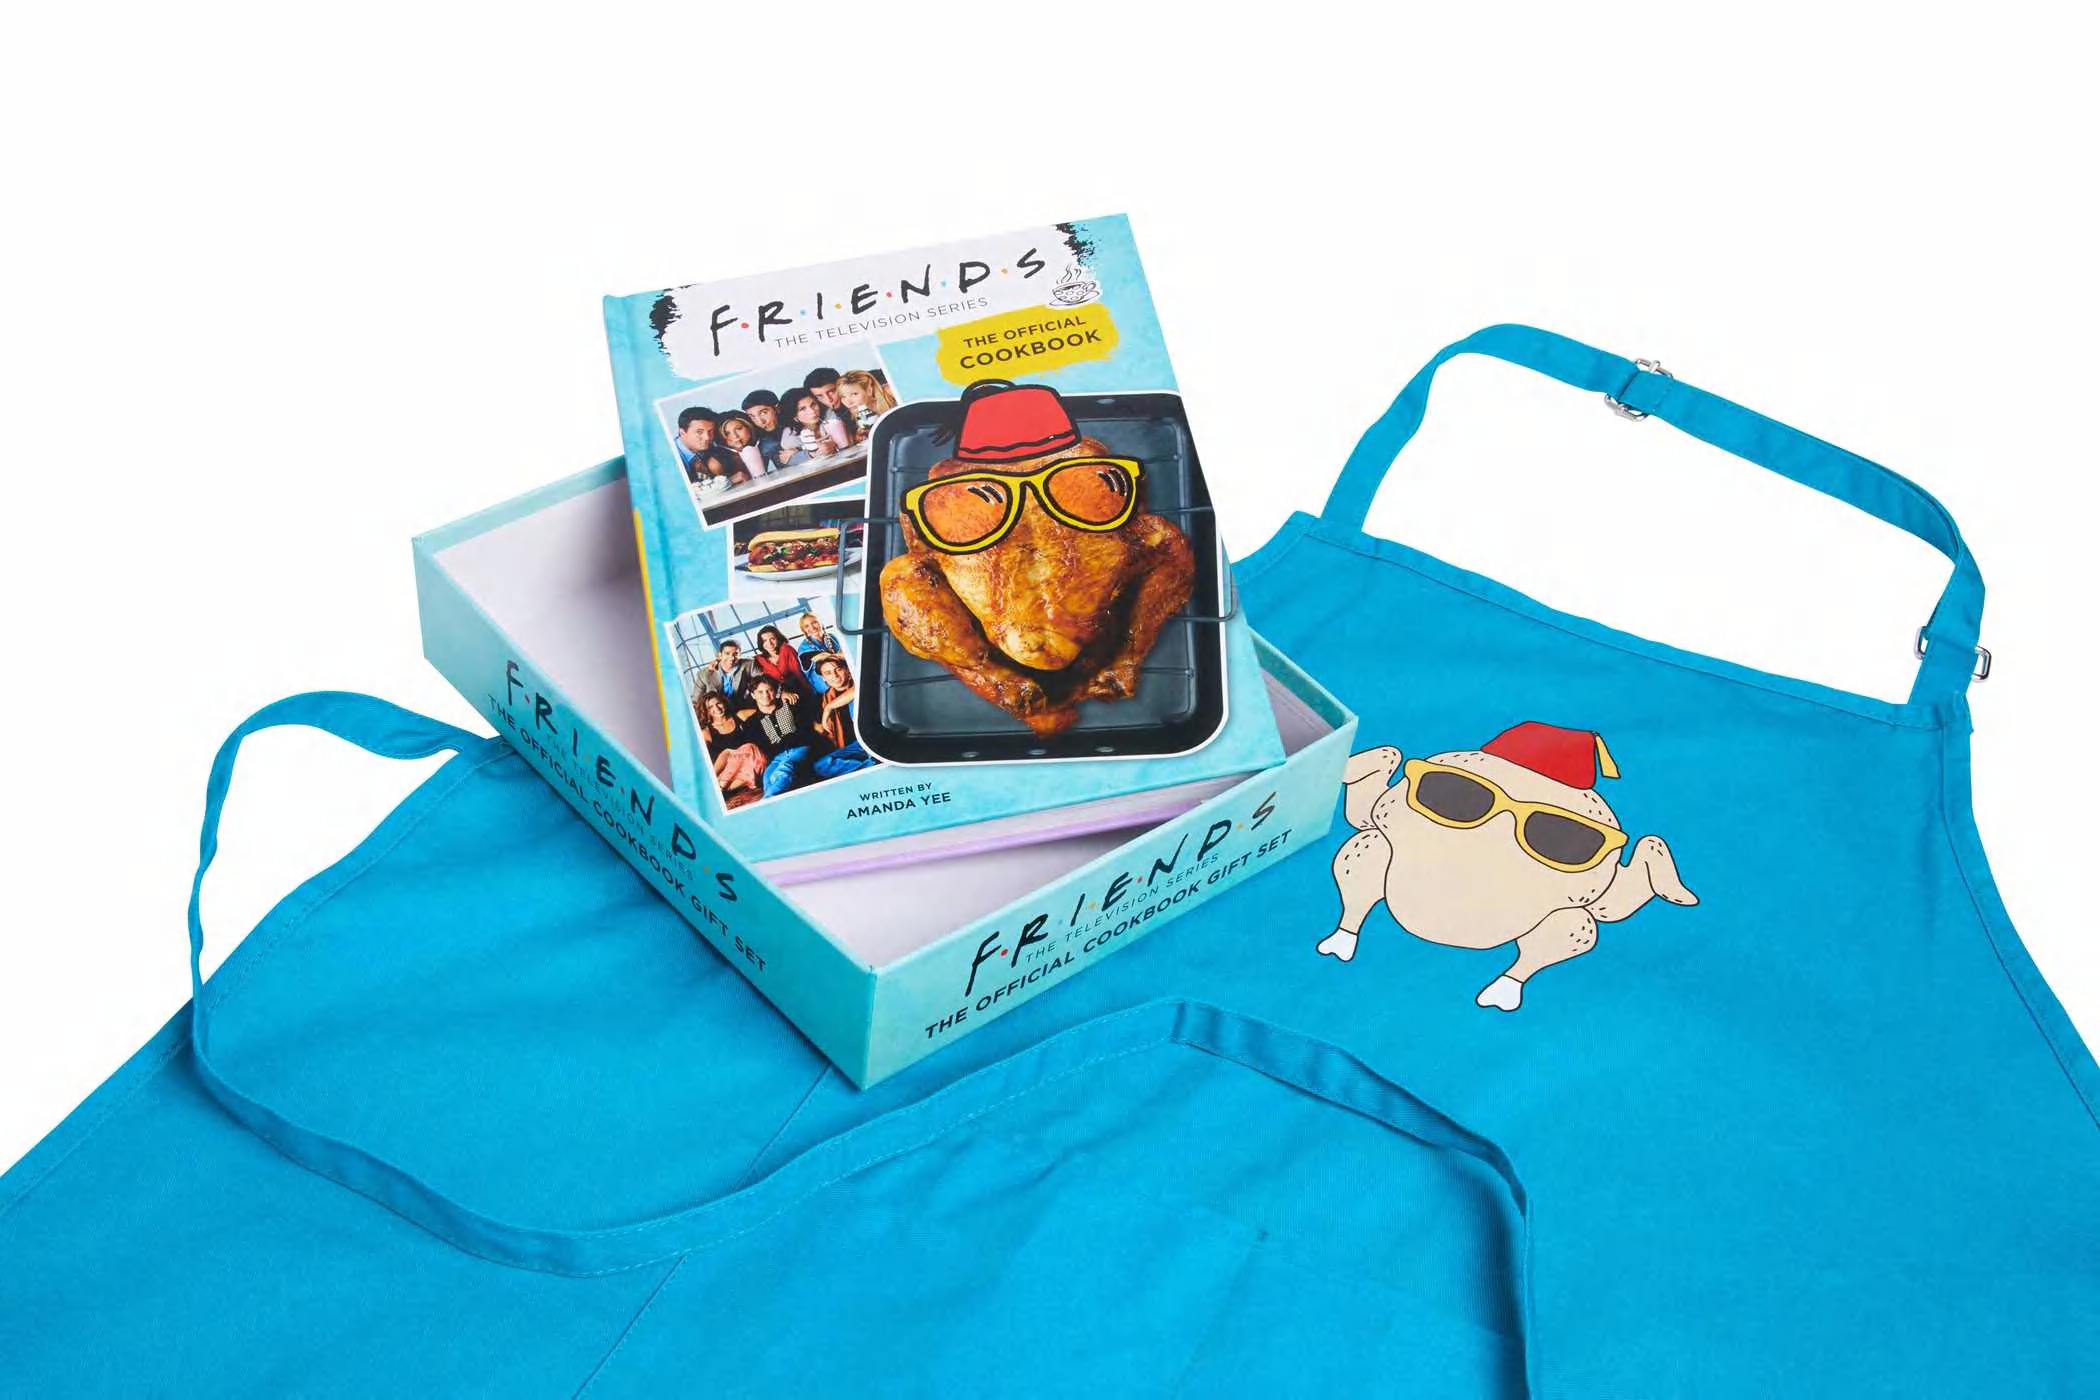 Friends Gift set 🎁 This Friends gift set is the perfect present for every  fan. Now available at Geek Nation 🇰🇼 #friends #geeknation